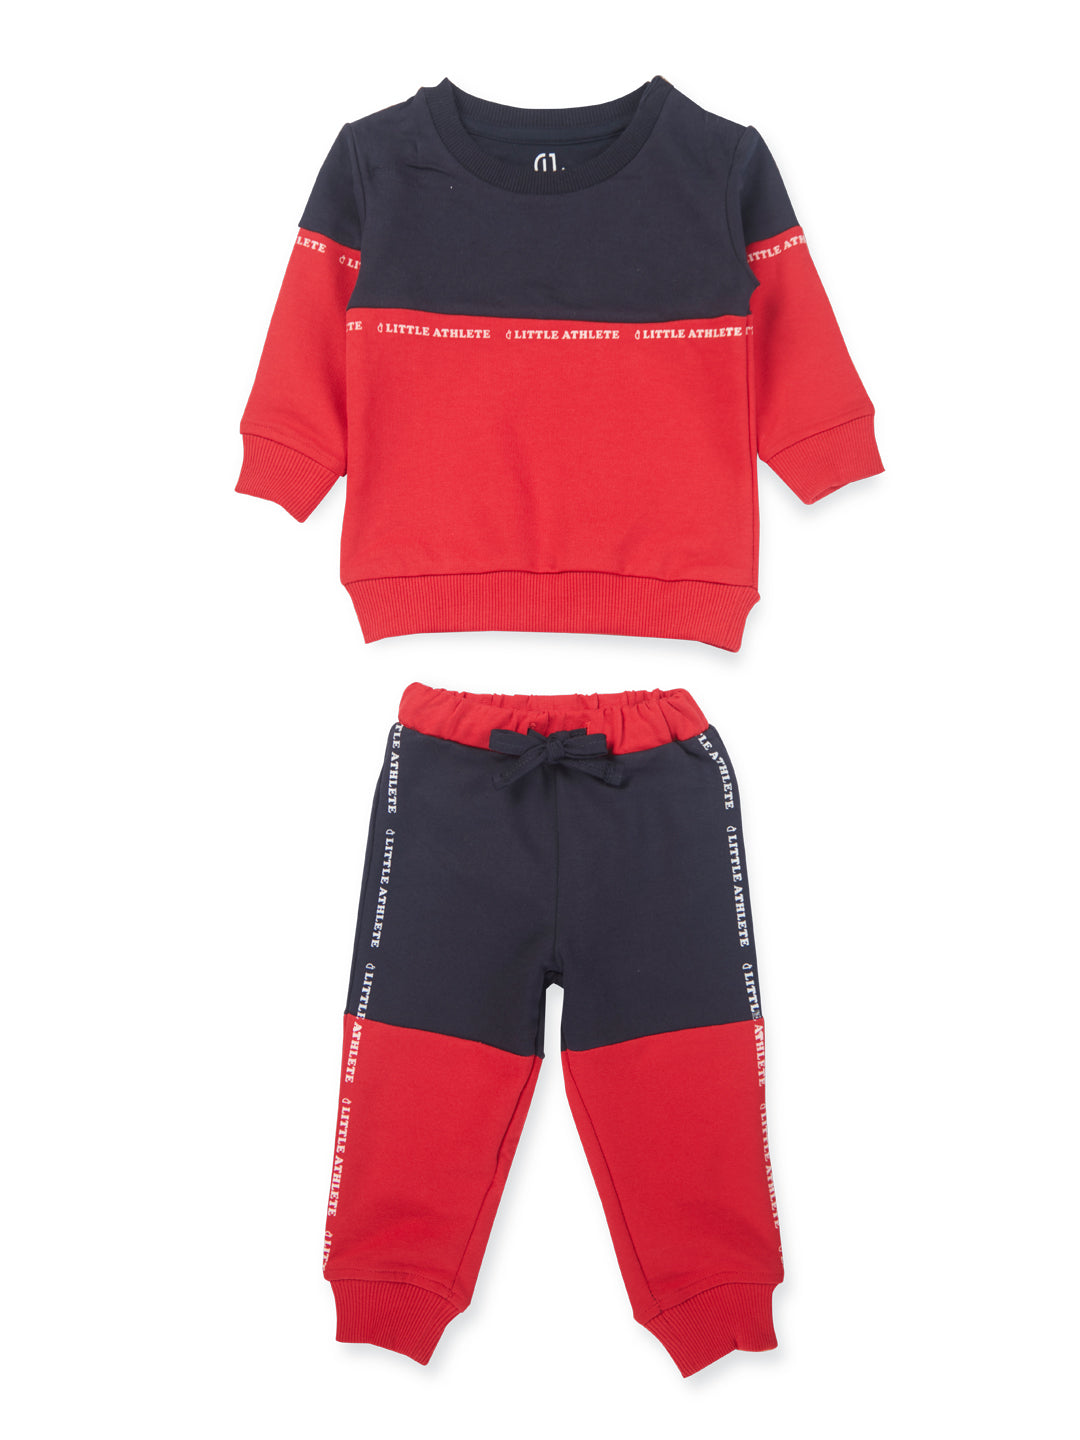 Baby Boys Set of Red round neck knitted cotton t-shirt and pajamas.